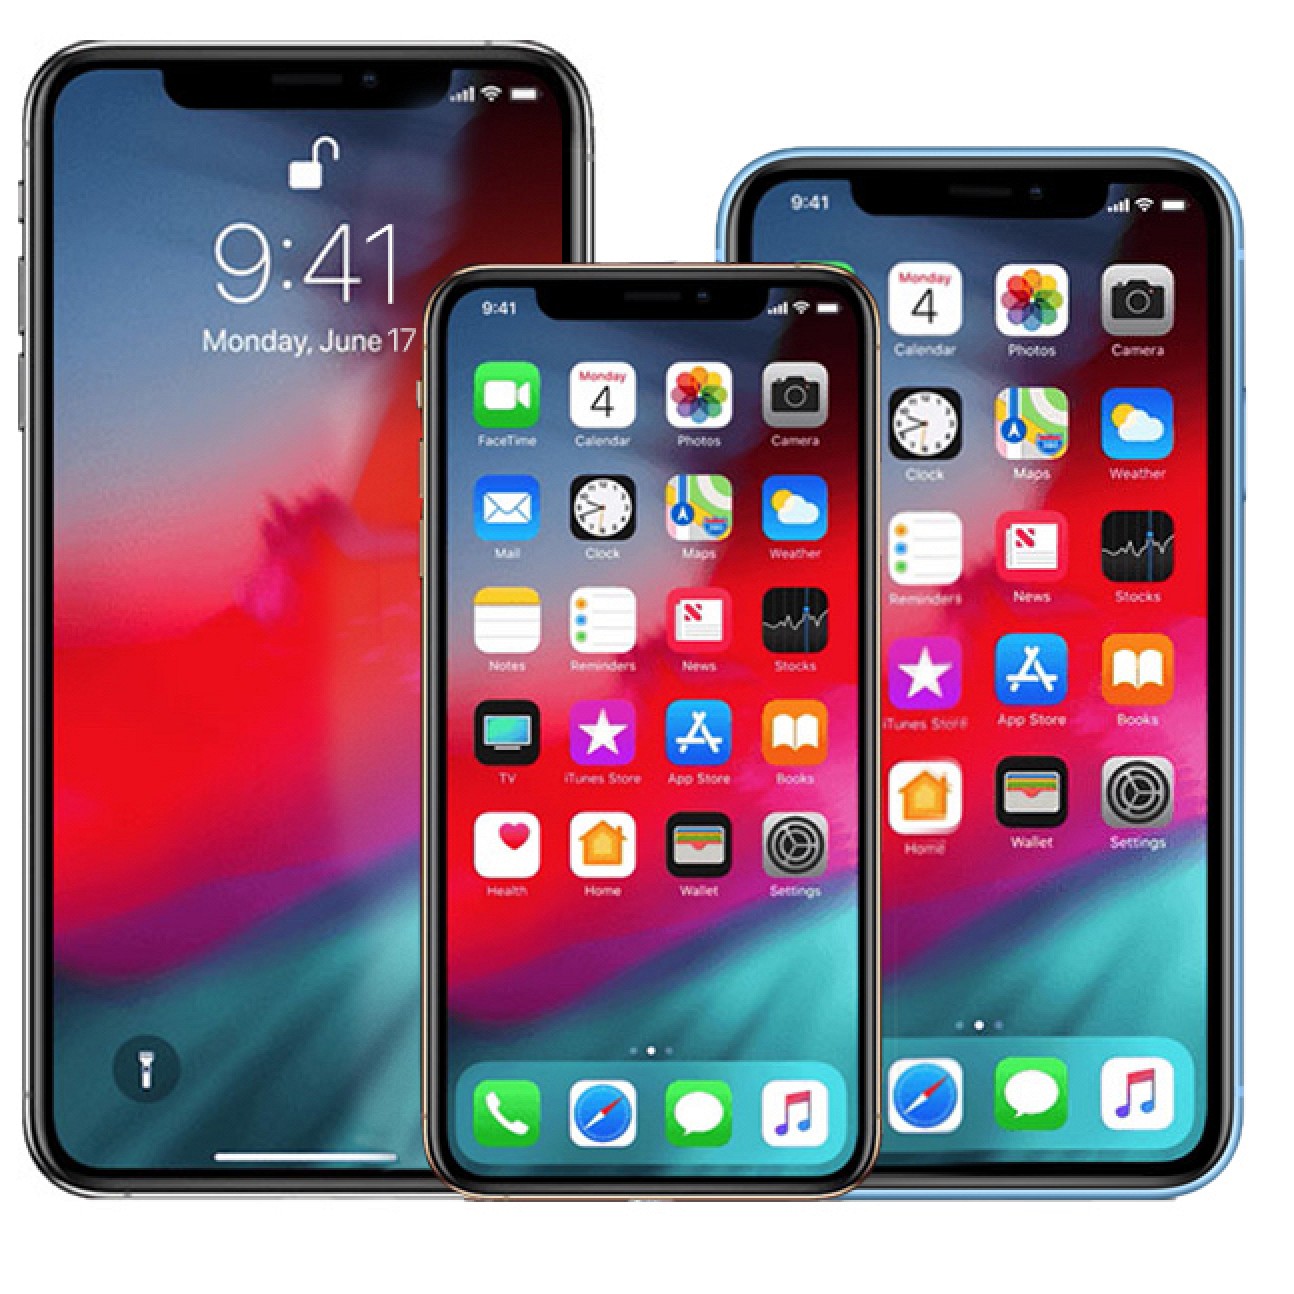 Kuo on 2020 iPhones 5.4Inch and 6.7Inch Models With 5G